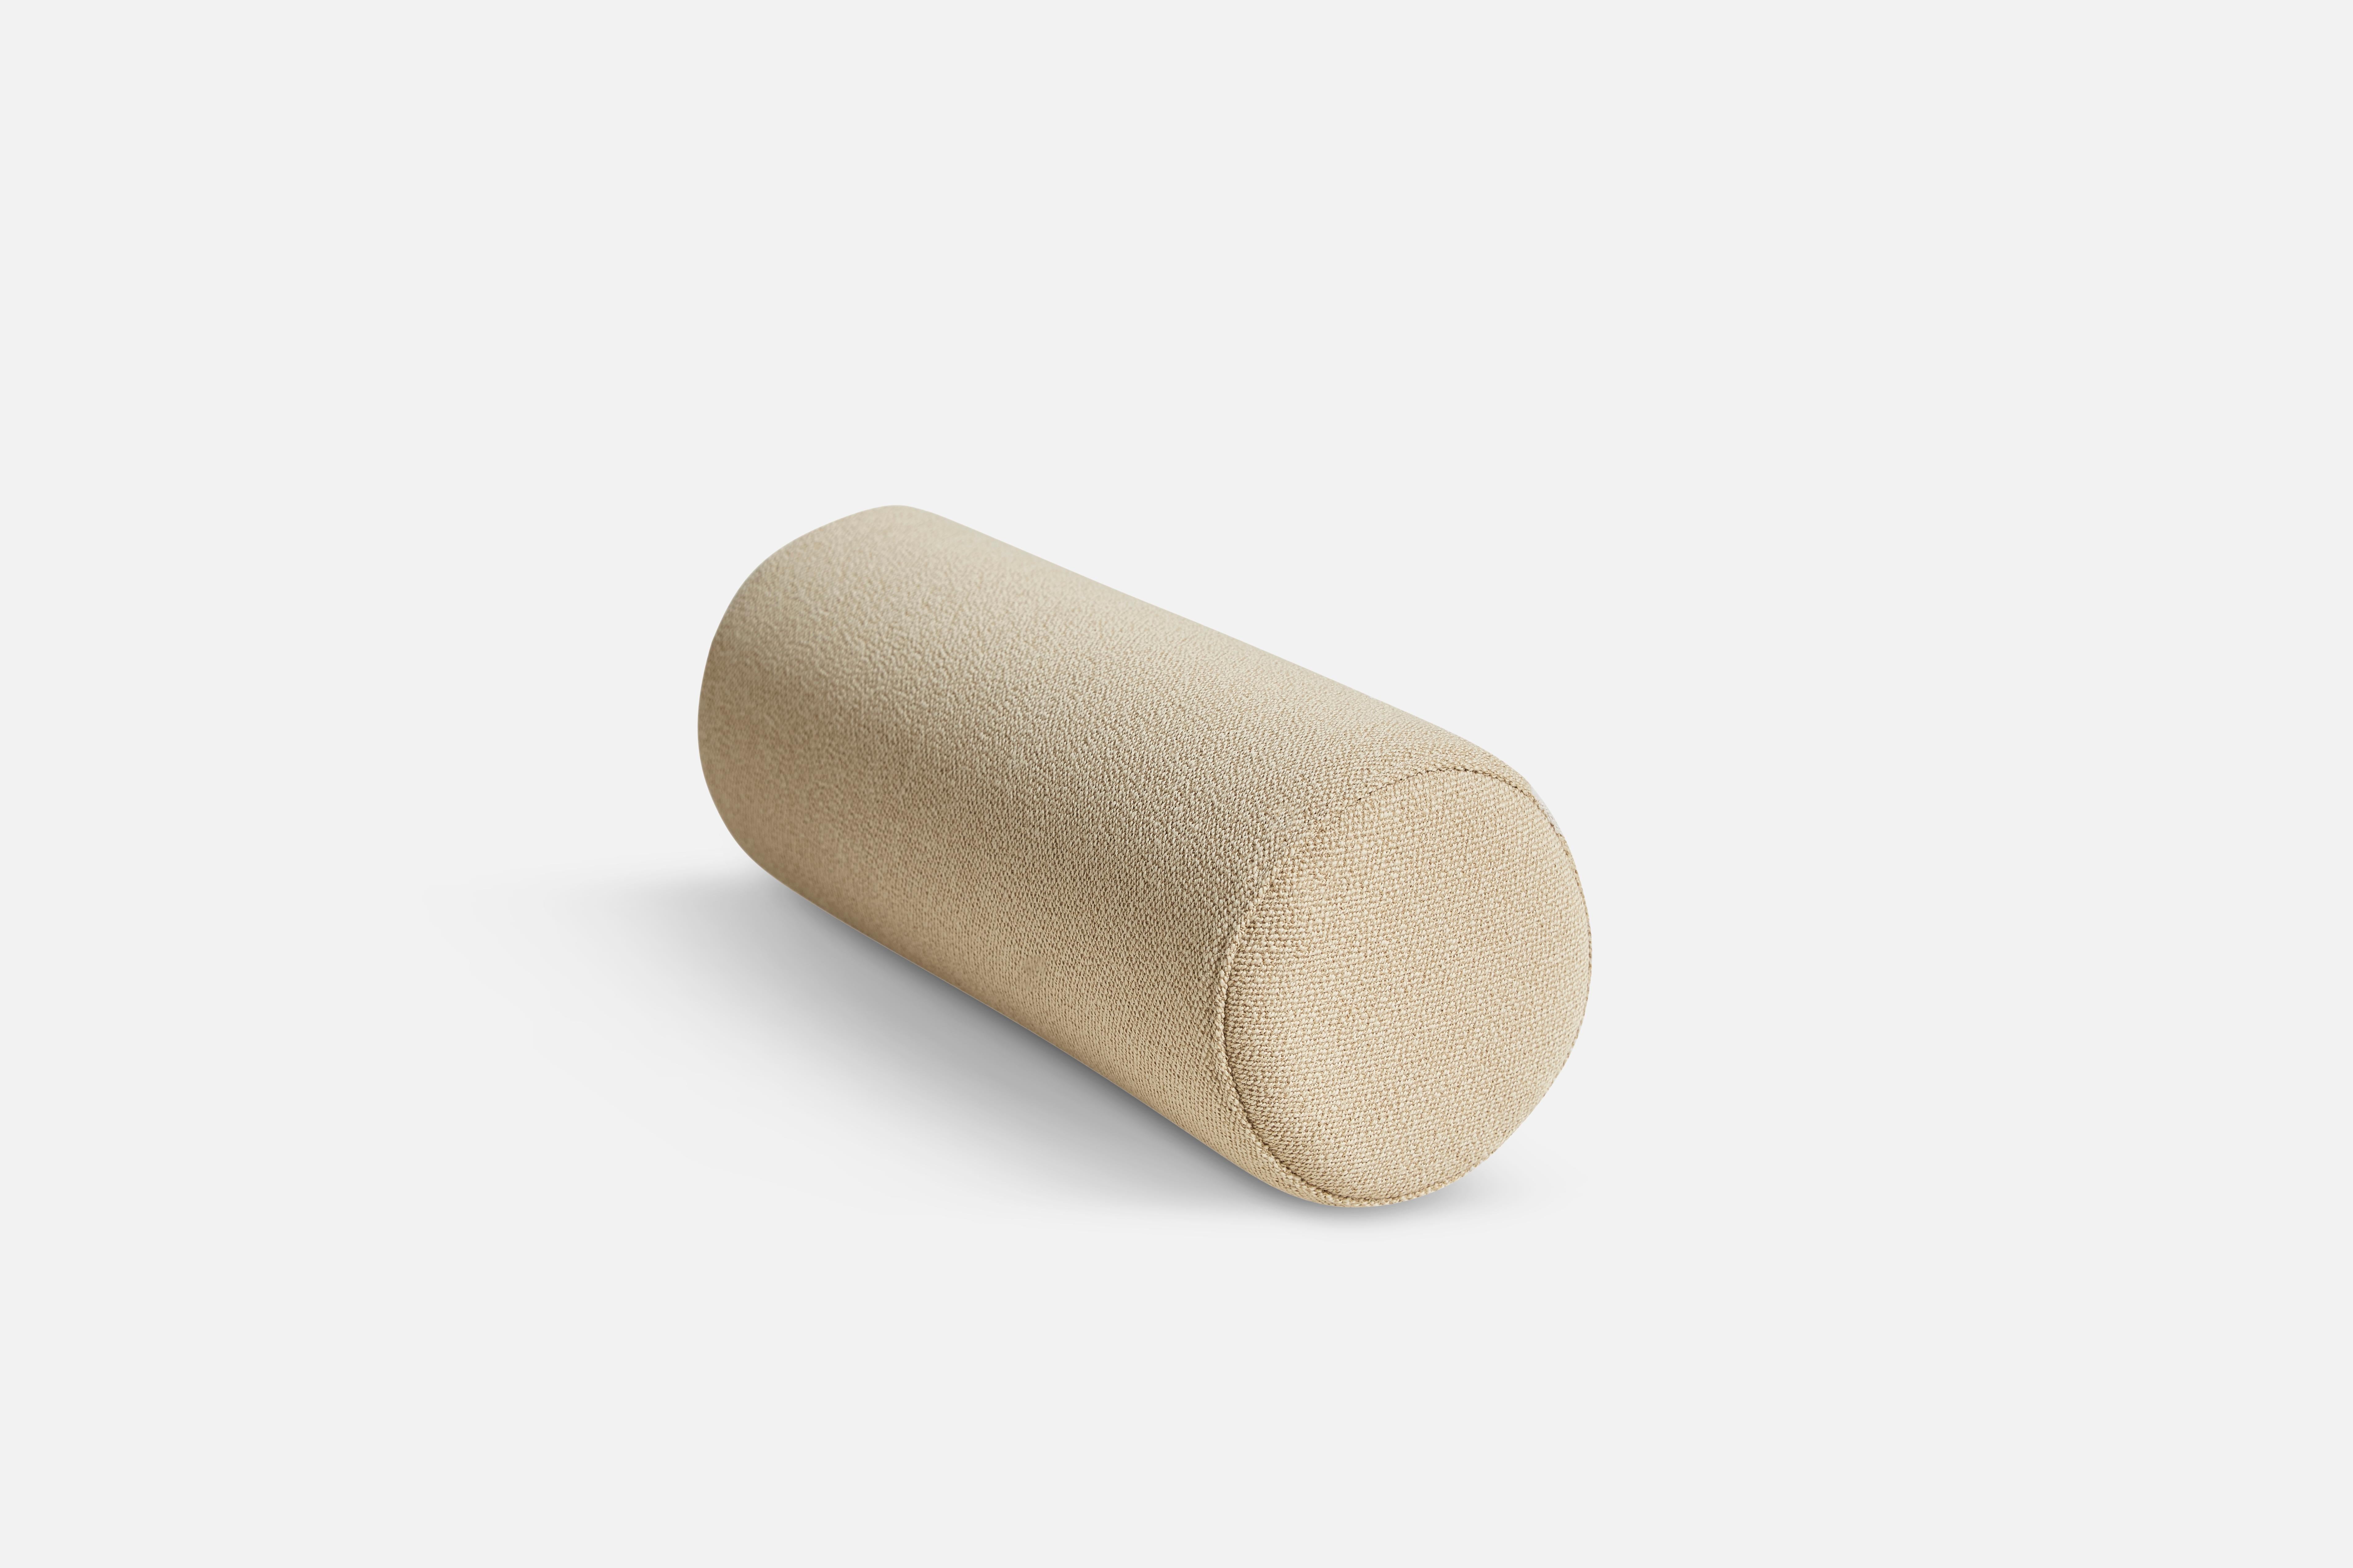 Set of 2 flora armrest cushion by Yonoh
Materials: Foam, Fabric (Kvadrat Vidar 0323)
Dimensions: D 16 x H 41 cm
Also available in different colours and materials. 

The founders, Mia and Torben Koed, decided to put their 30 years of experience